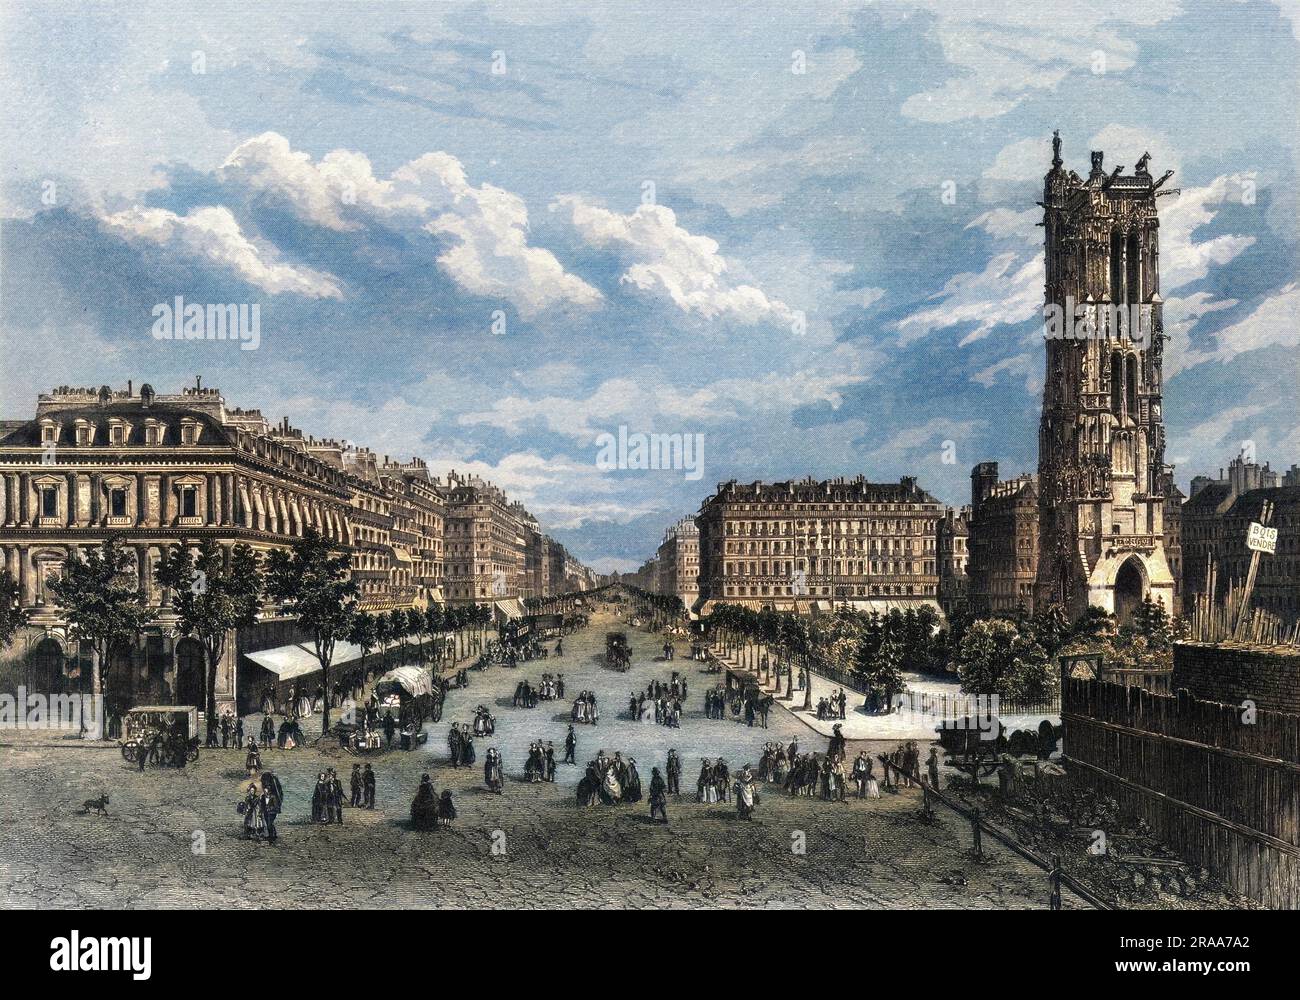 One of the broad boulevards thrusting through the old streets thanks to the plans of baron Haussmann.     Date: circa 1850 Stock Photo